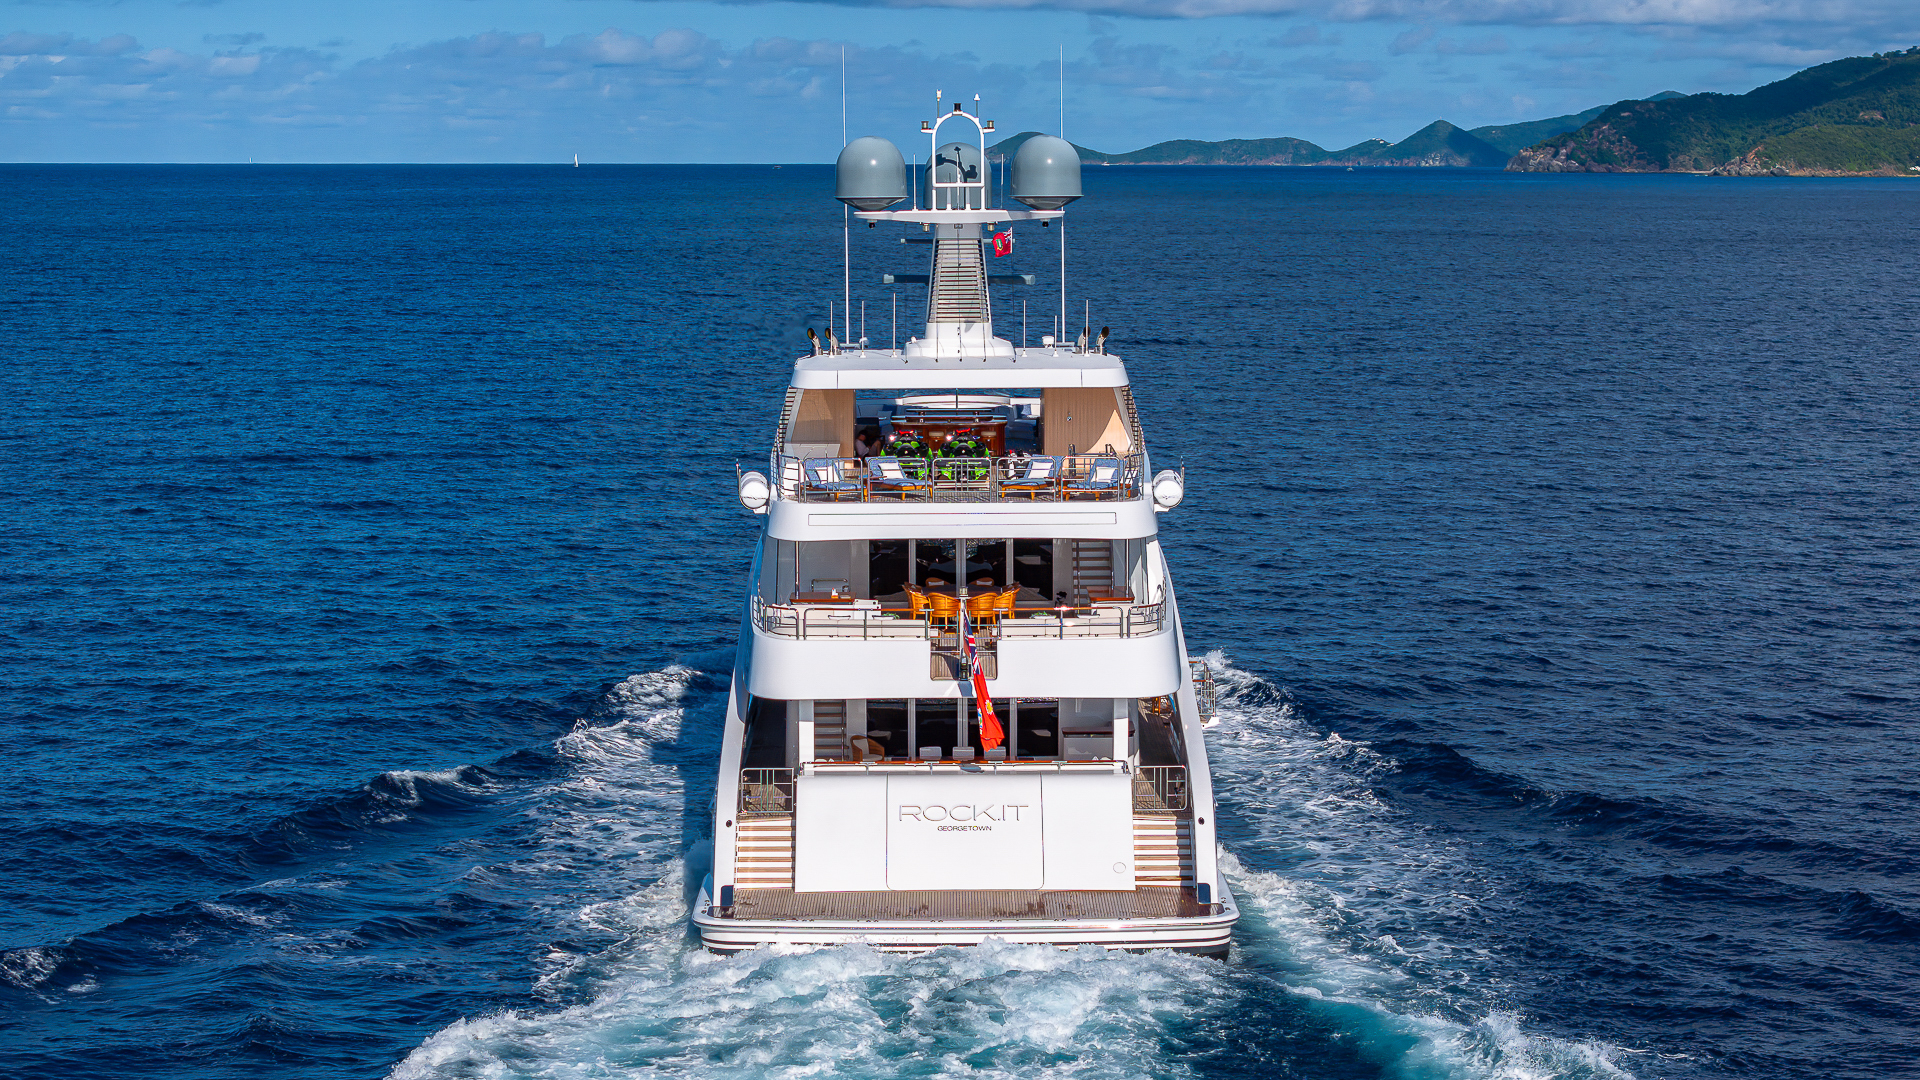 Rock It Aft View - Credit Yachting Image